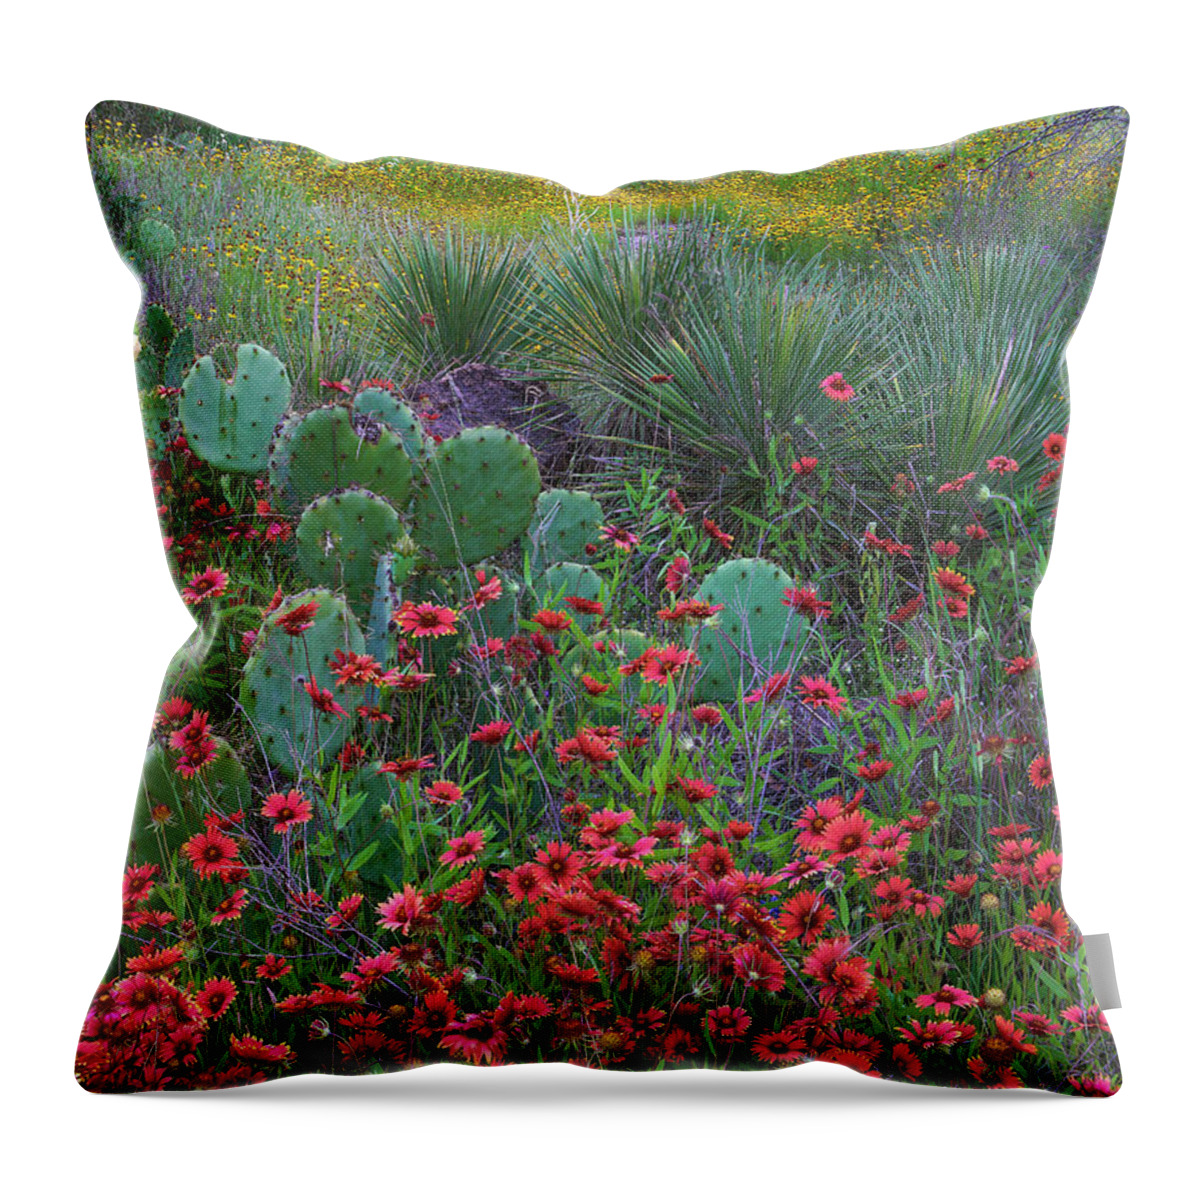 00567595 Throw Pillow featuring the photograph Indian Blanket Flowers And Opuntia, Inks Lake State Park, Texas #1 by Tim Fitzharris